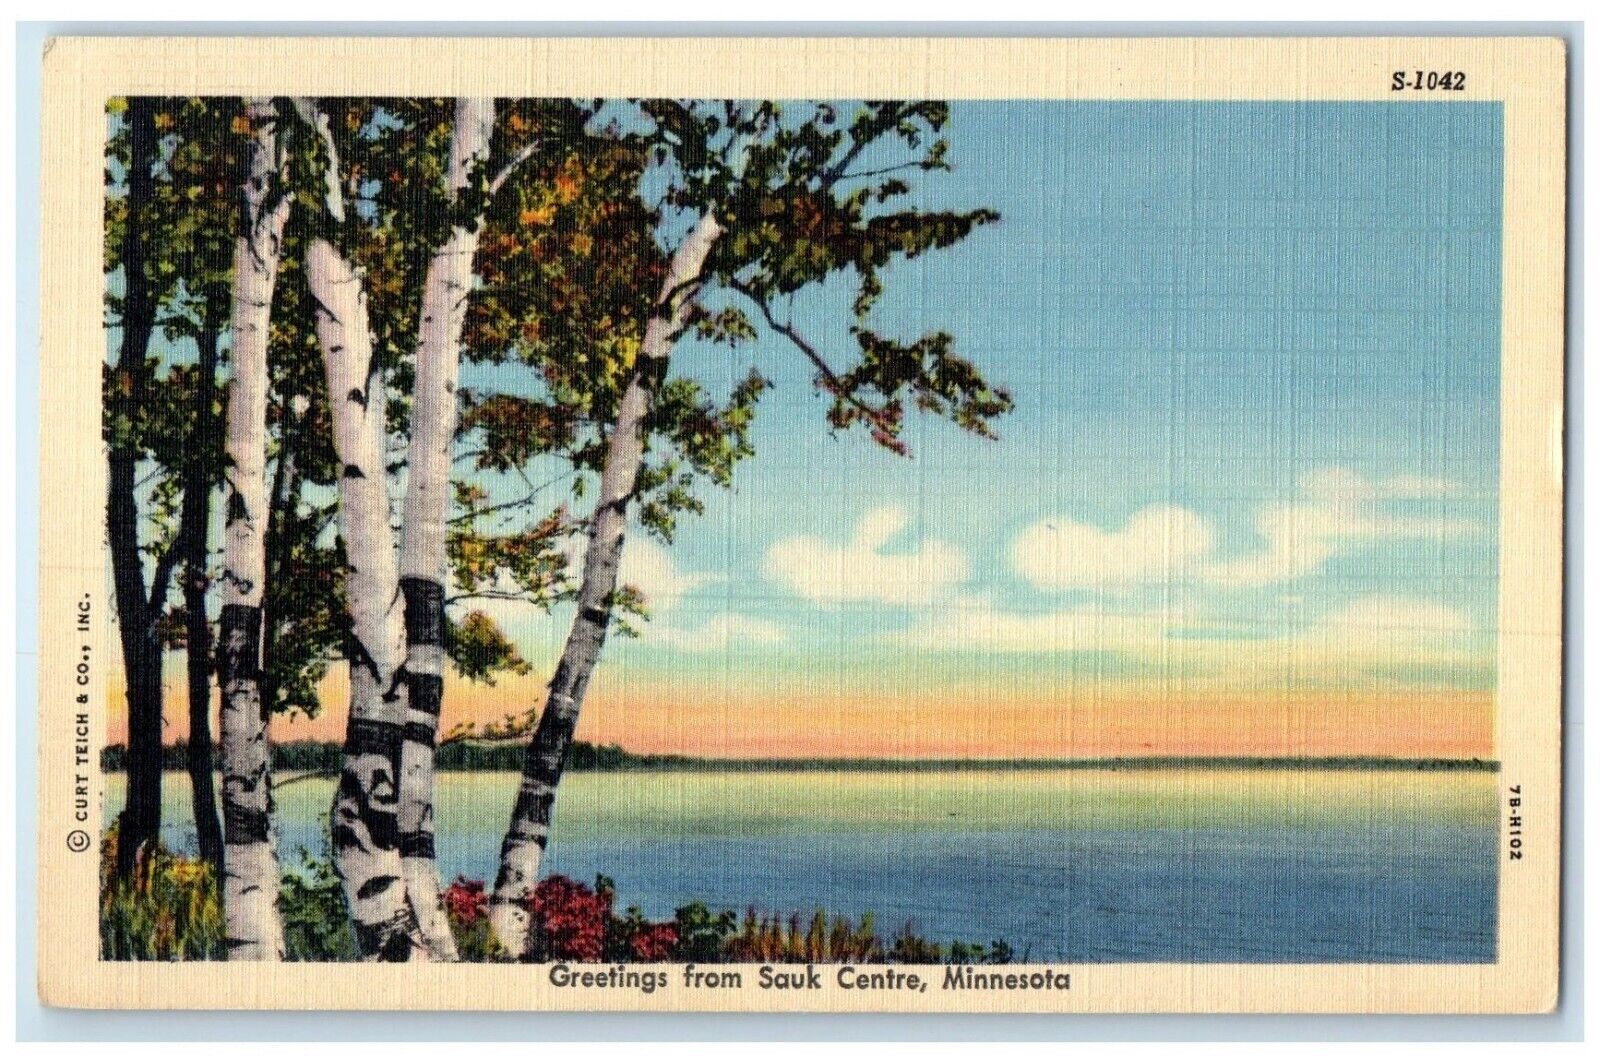 1949 Greetings From Sauk Centre Minnesota MN Sea View Posted Vintage Postcard